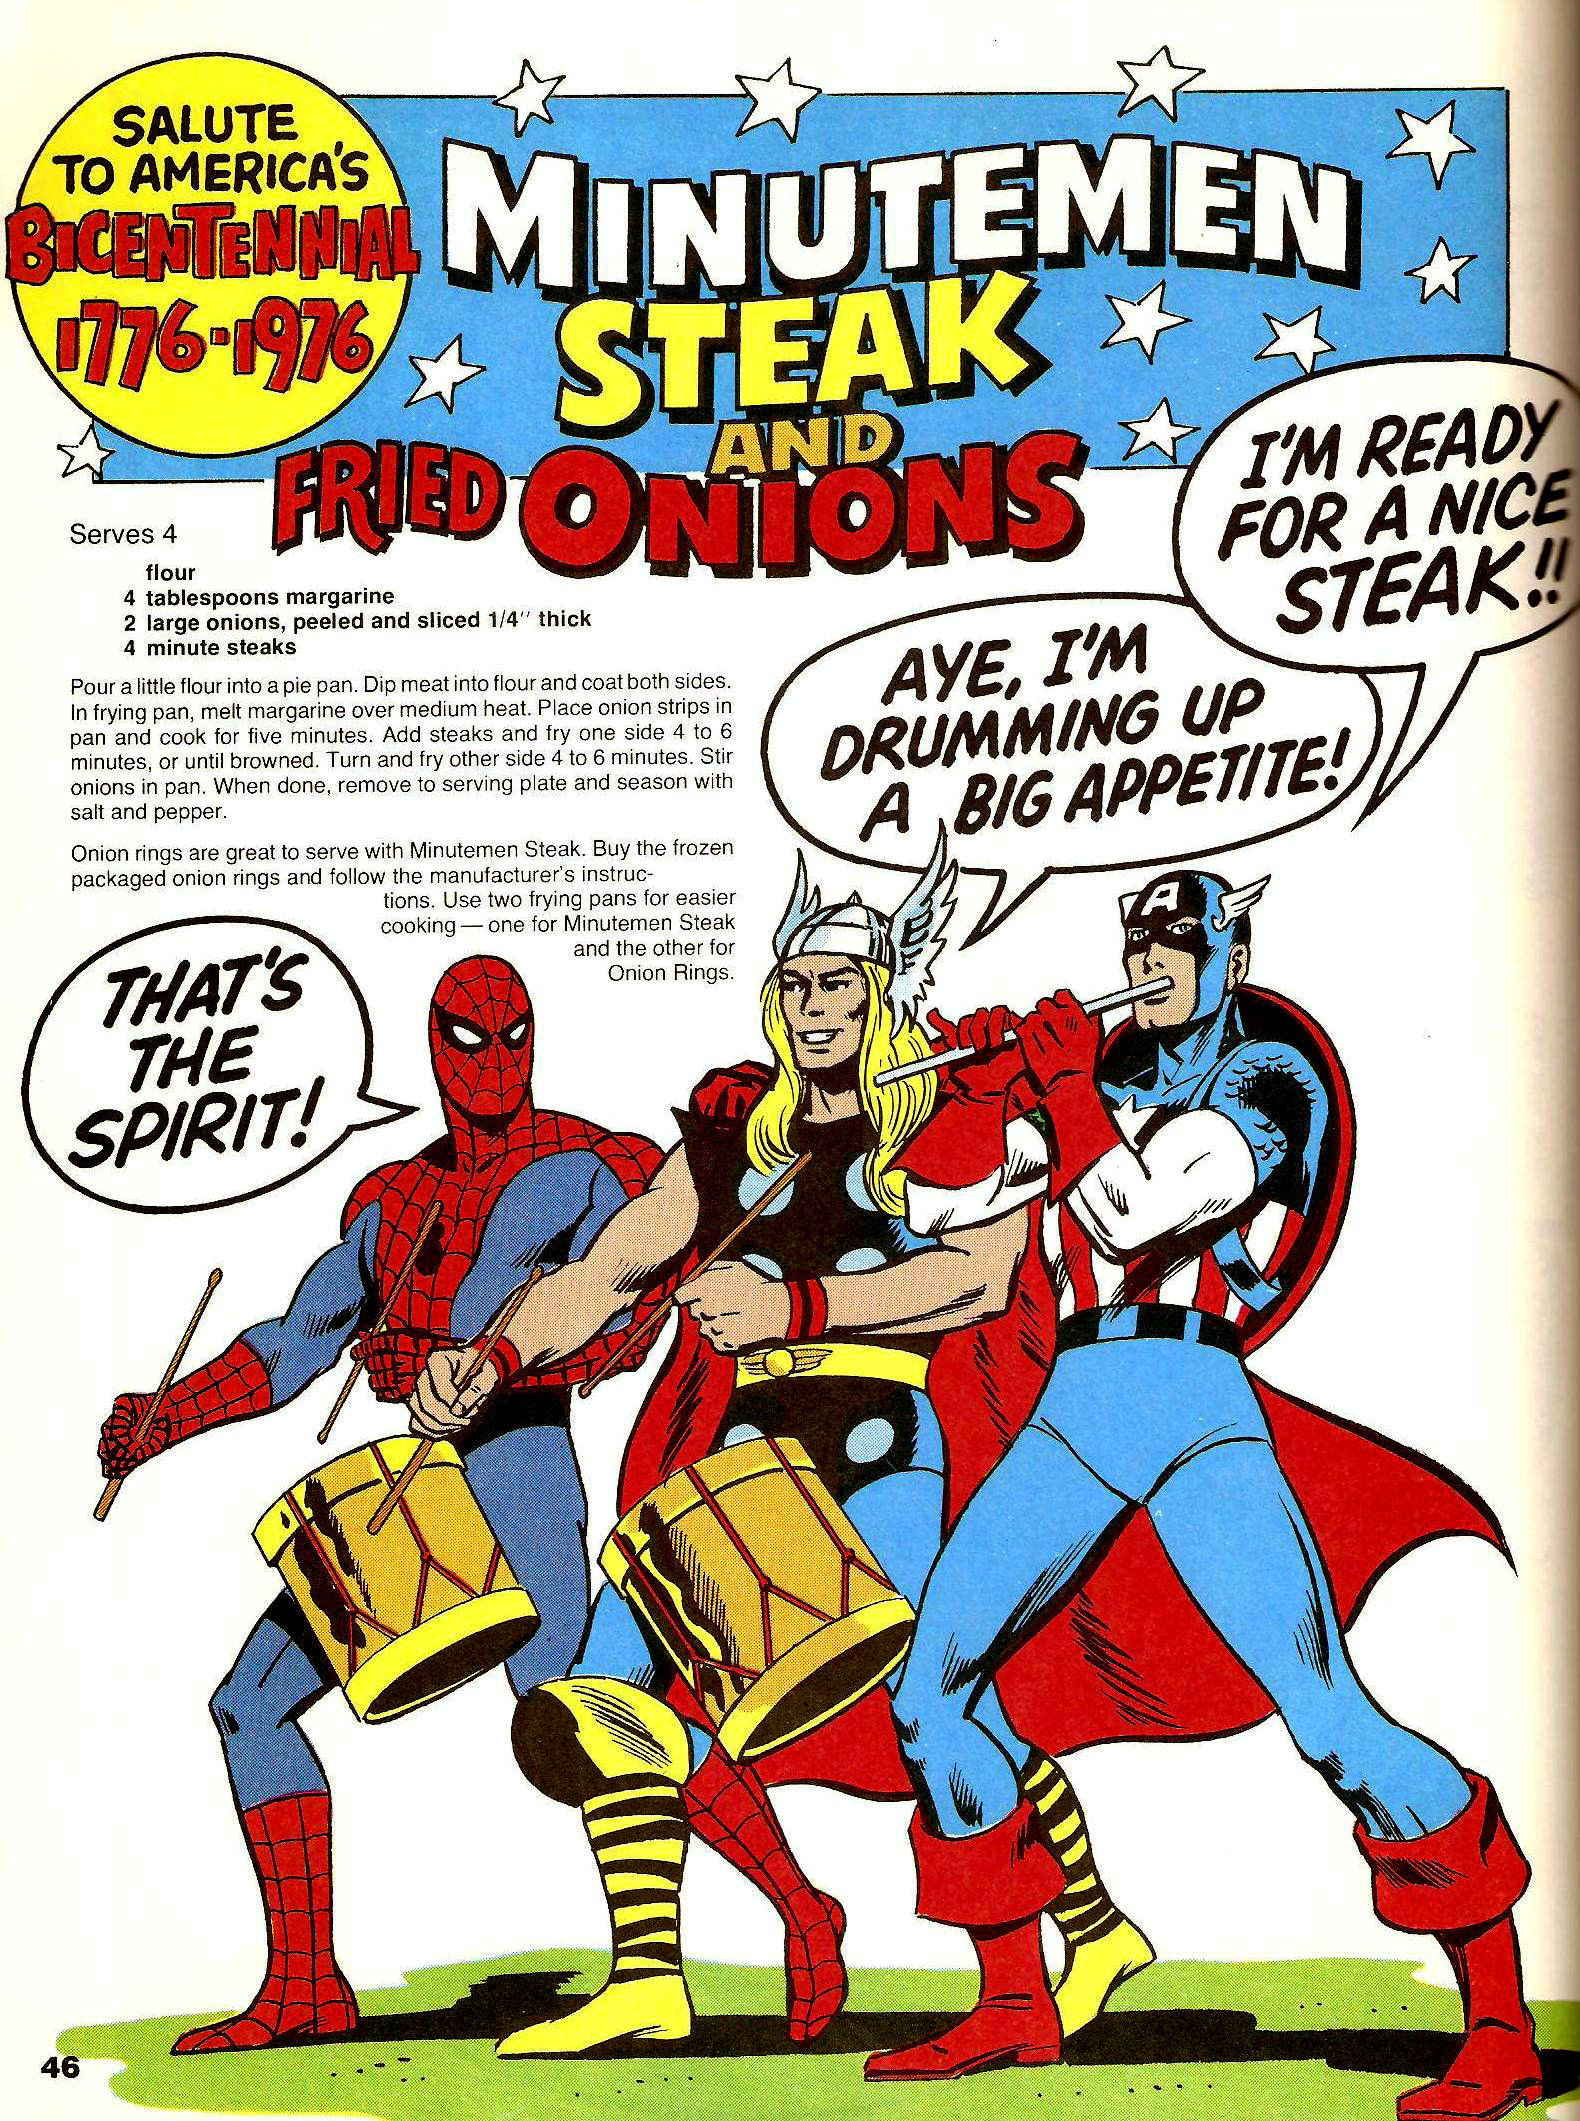 From Stan Lee Presents The Mighty Marvel Superheroes' Cookbook (1977)